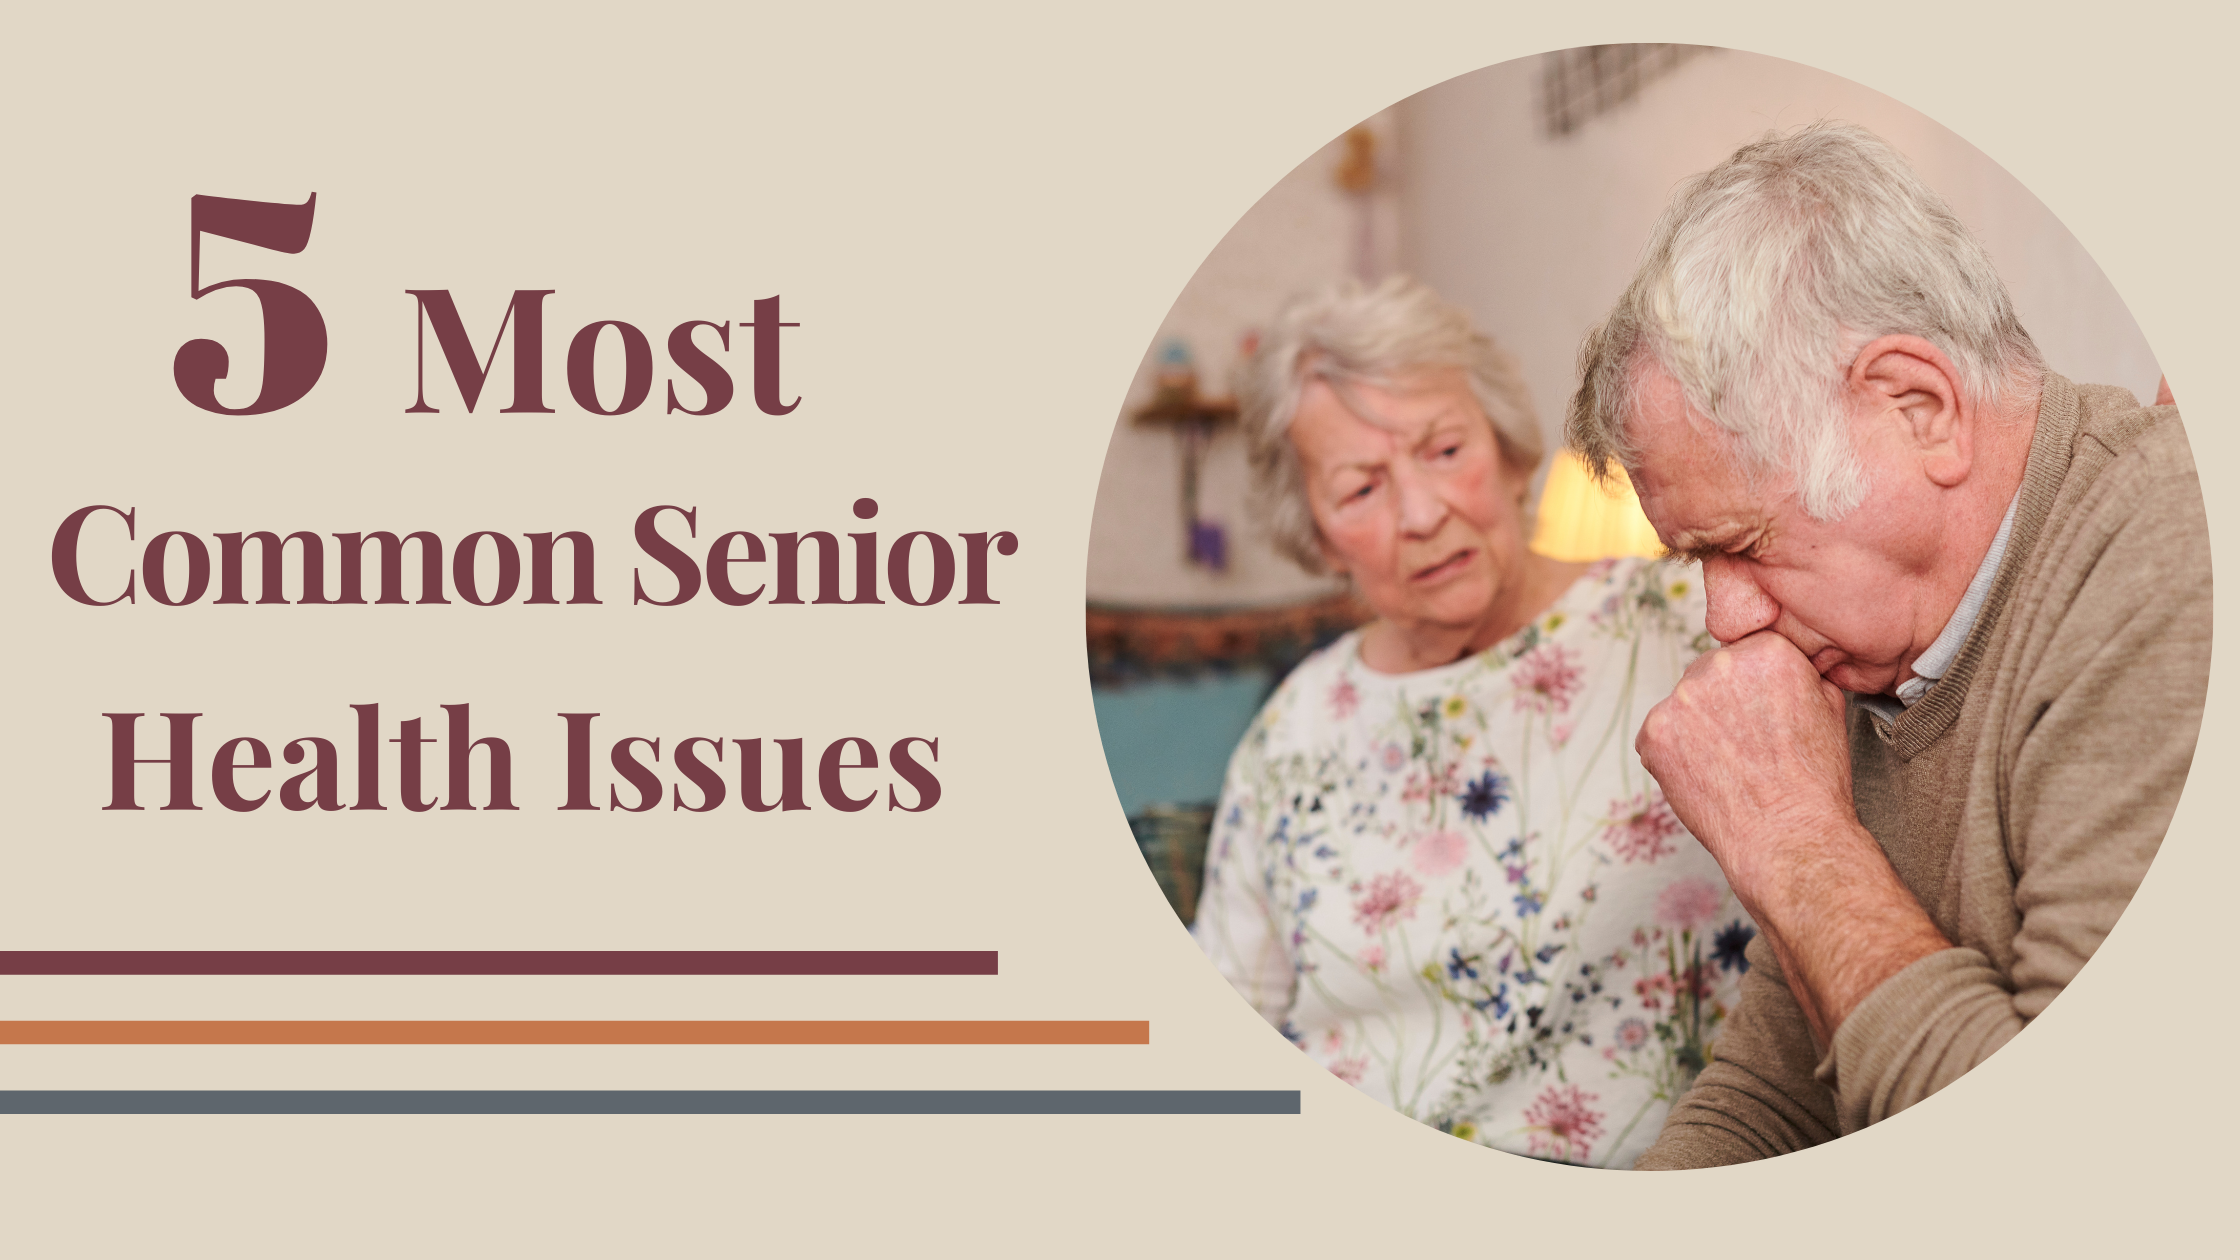 5 Most Common Senior Health Issues